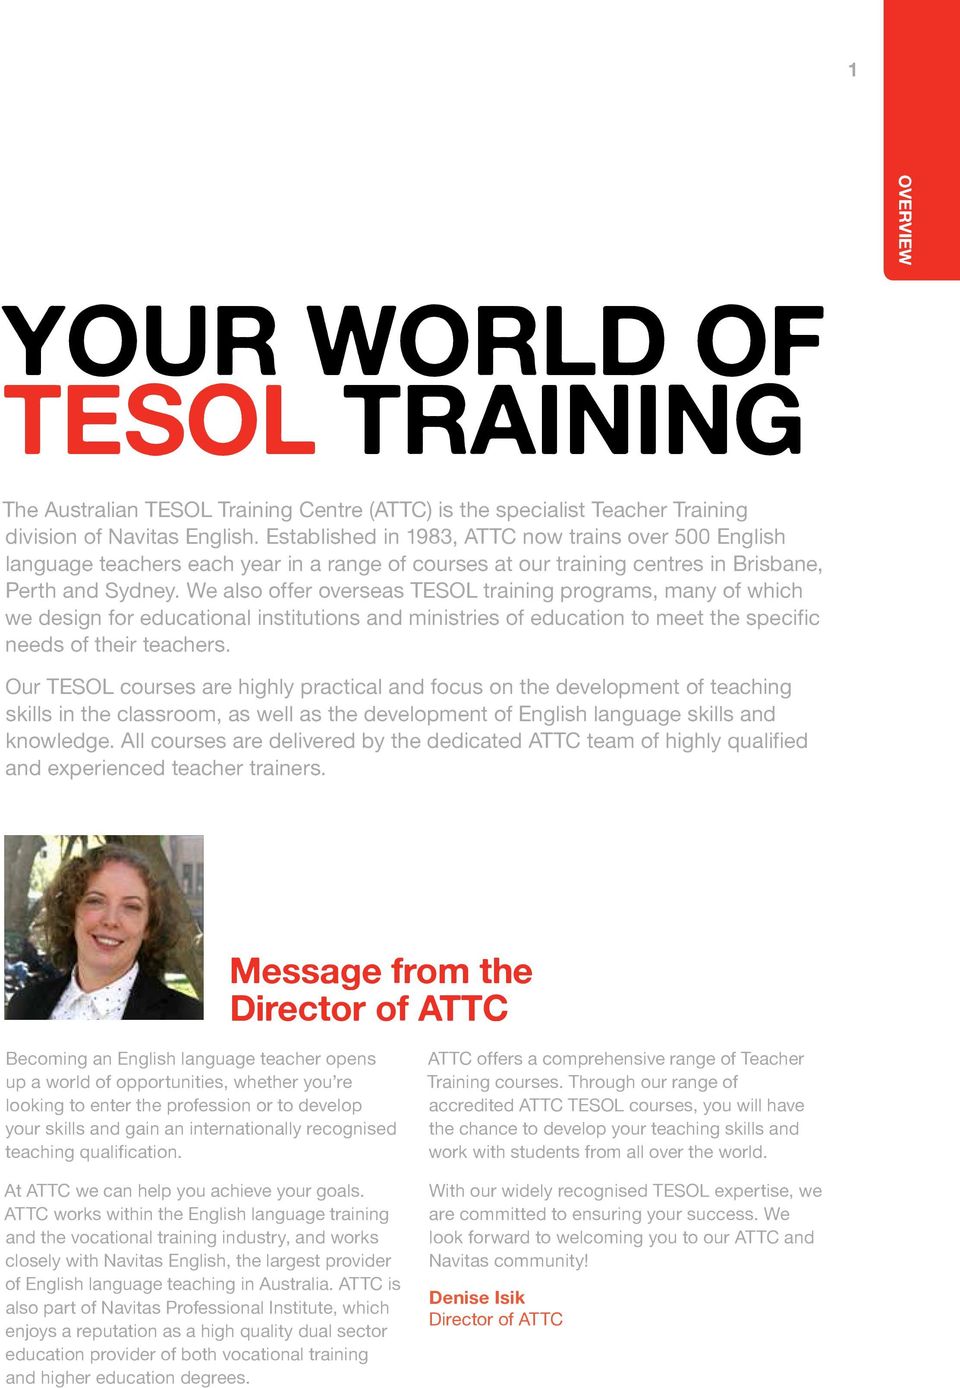 We also offer overseas TESOL training programs, many of which we design for educational institutions and ministries of education to meet the specific needs of their teachers.